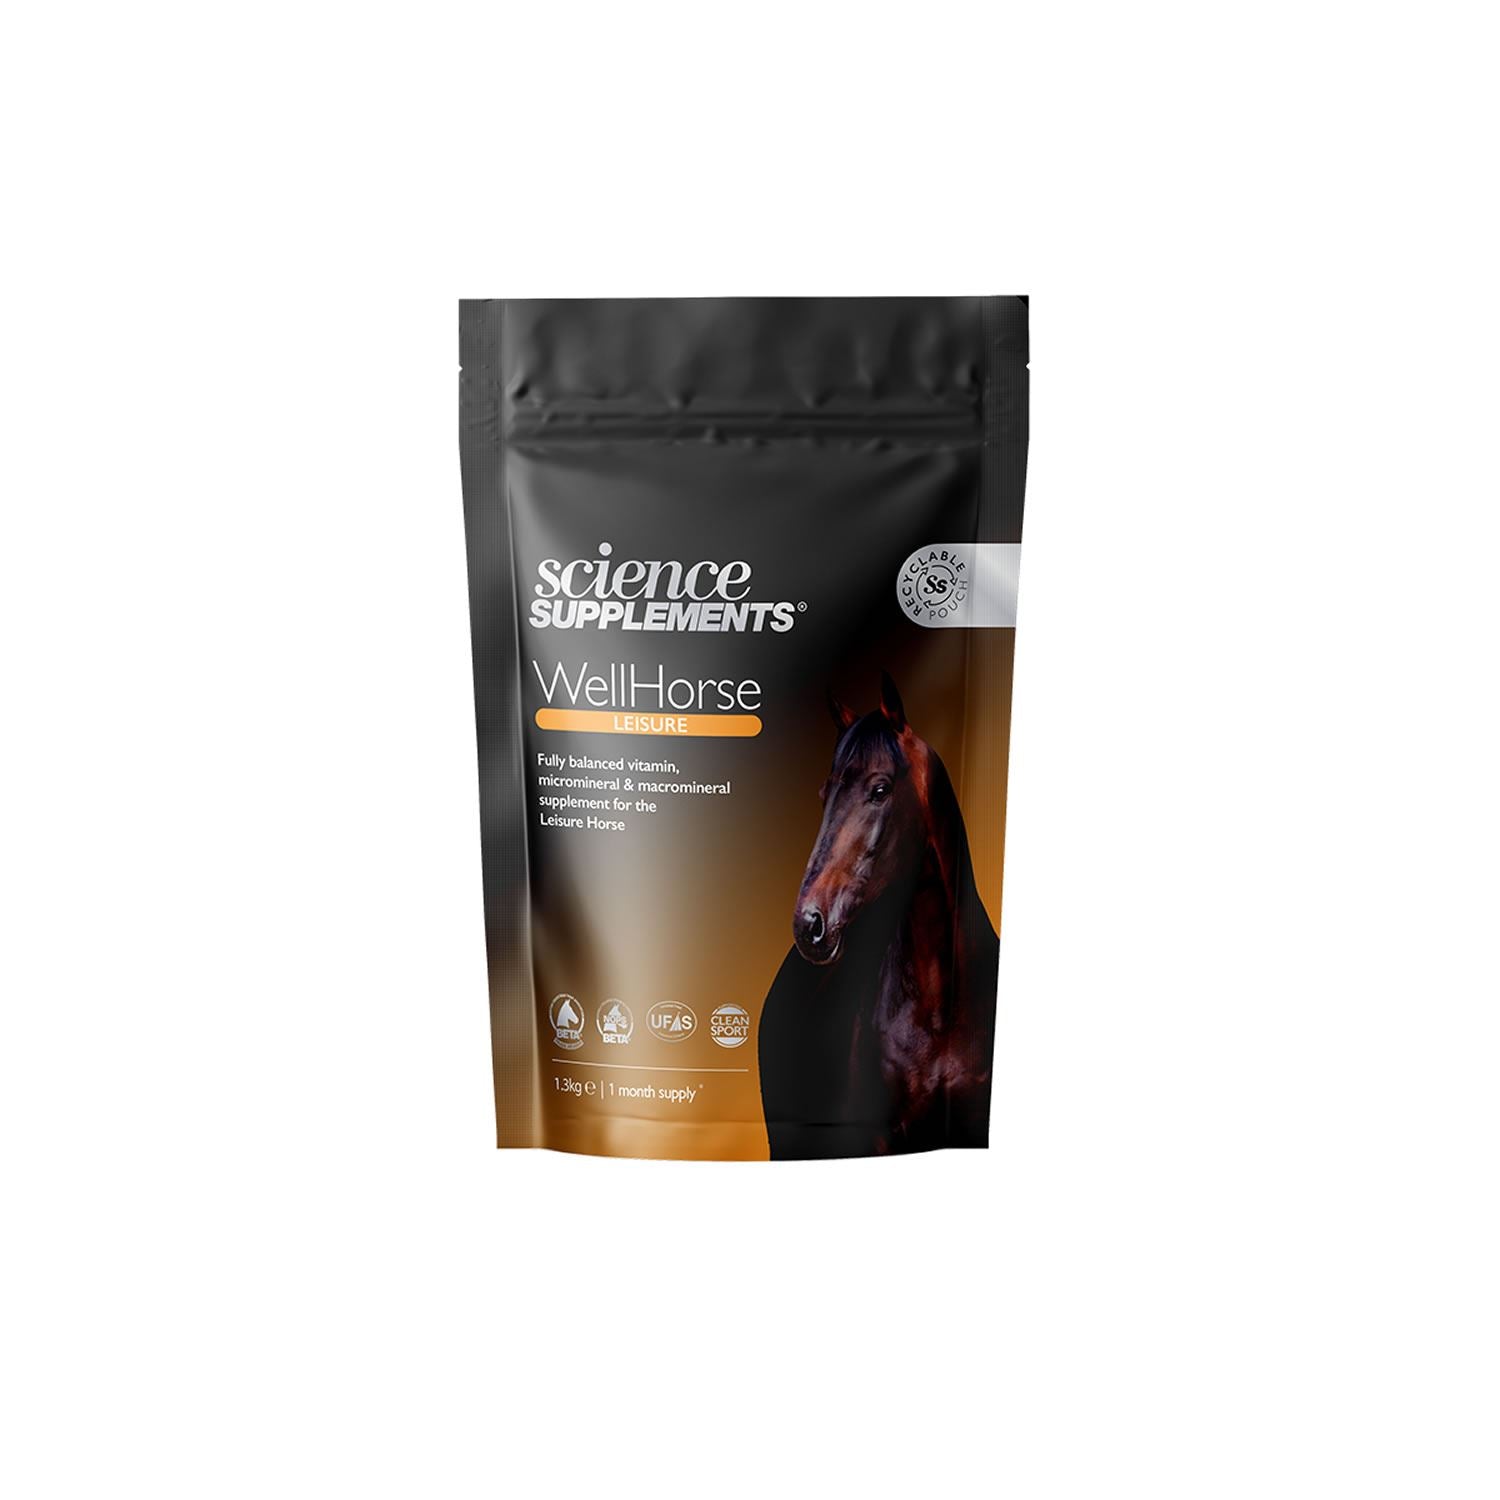 Science Supplements Wellhorse Leisure - Just Horse Riders